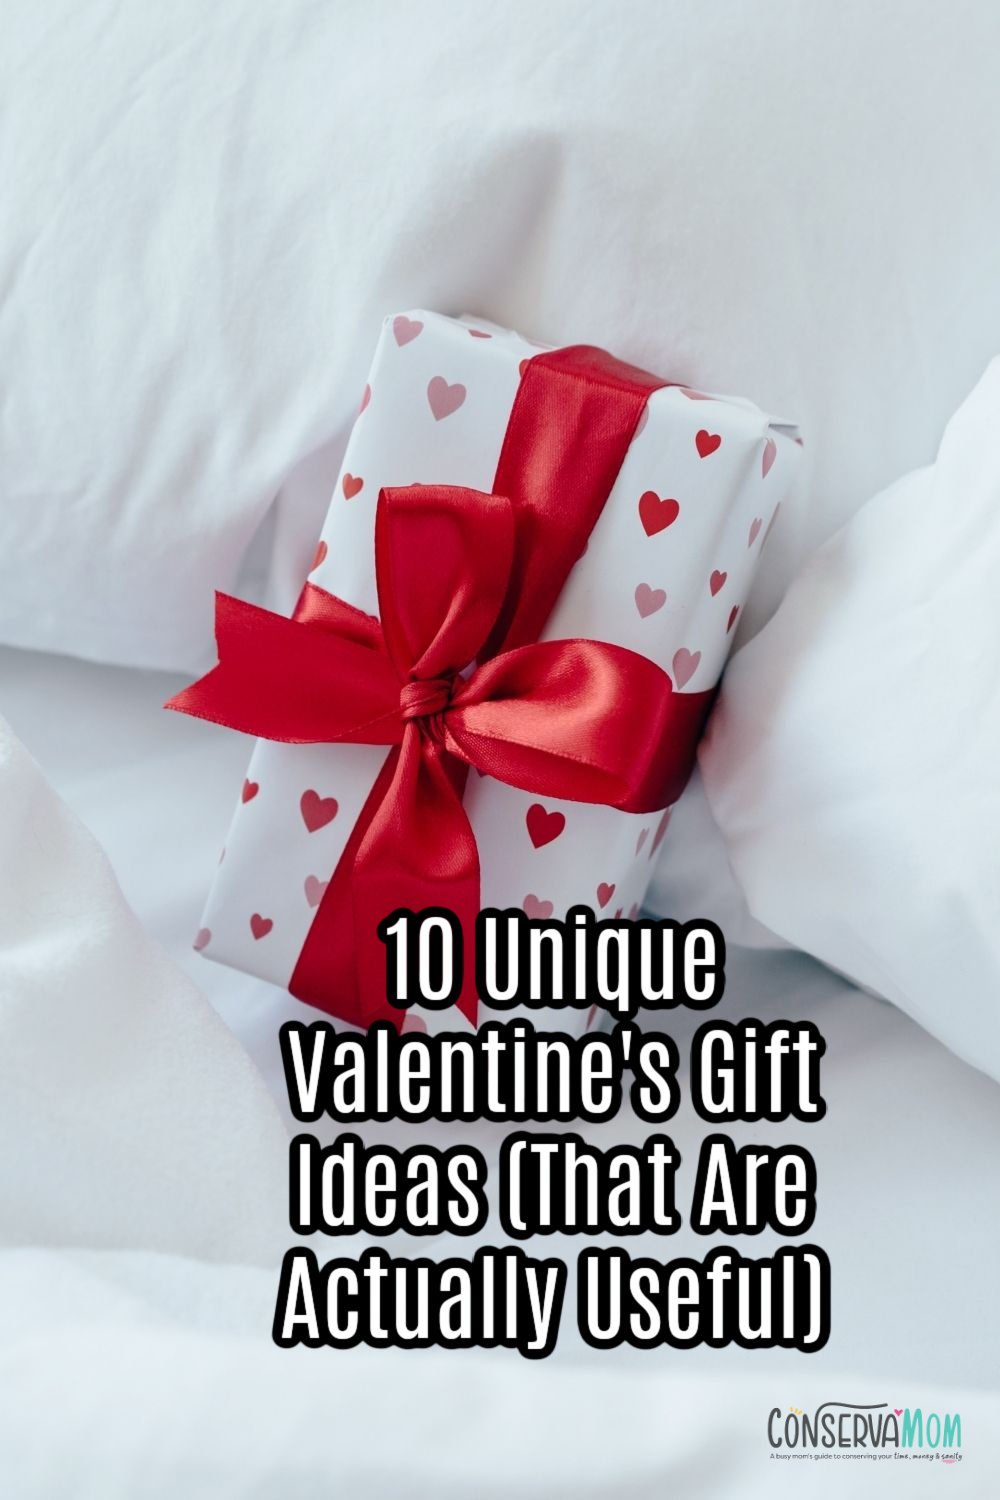 10 Unique Valentine's Gift Ideas (That Are Actually Useful)